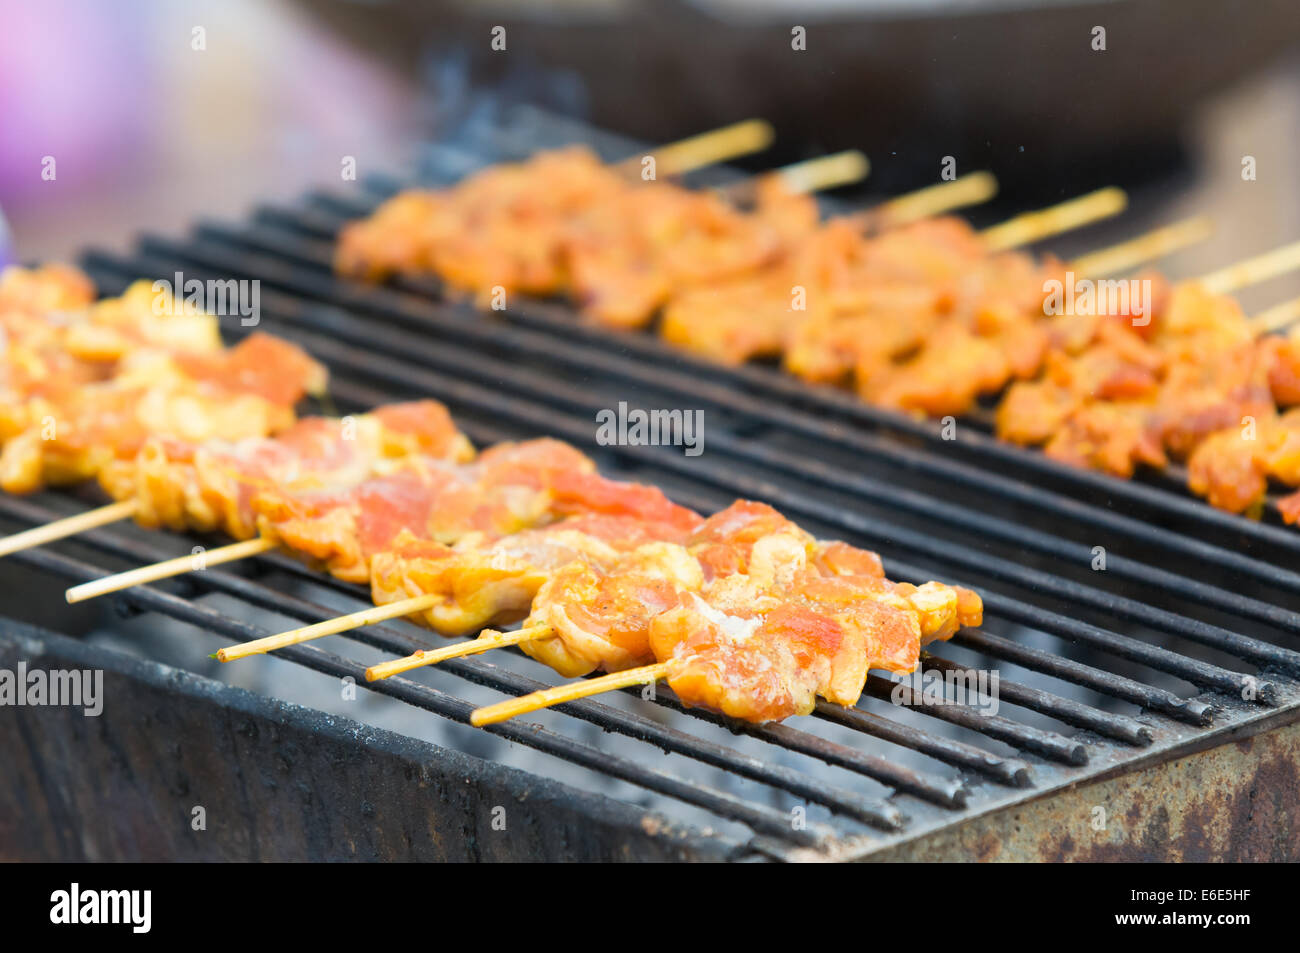 Pieces of pork on wooden sticks on a barbecue in Thailand. Very shallow depth of field with the nearest pieces of pork in focus. Stock Photo